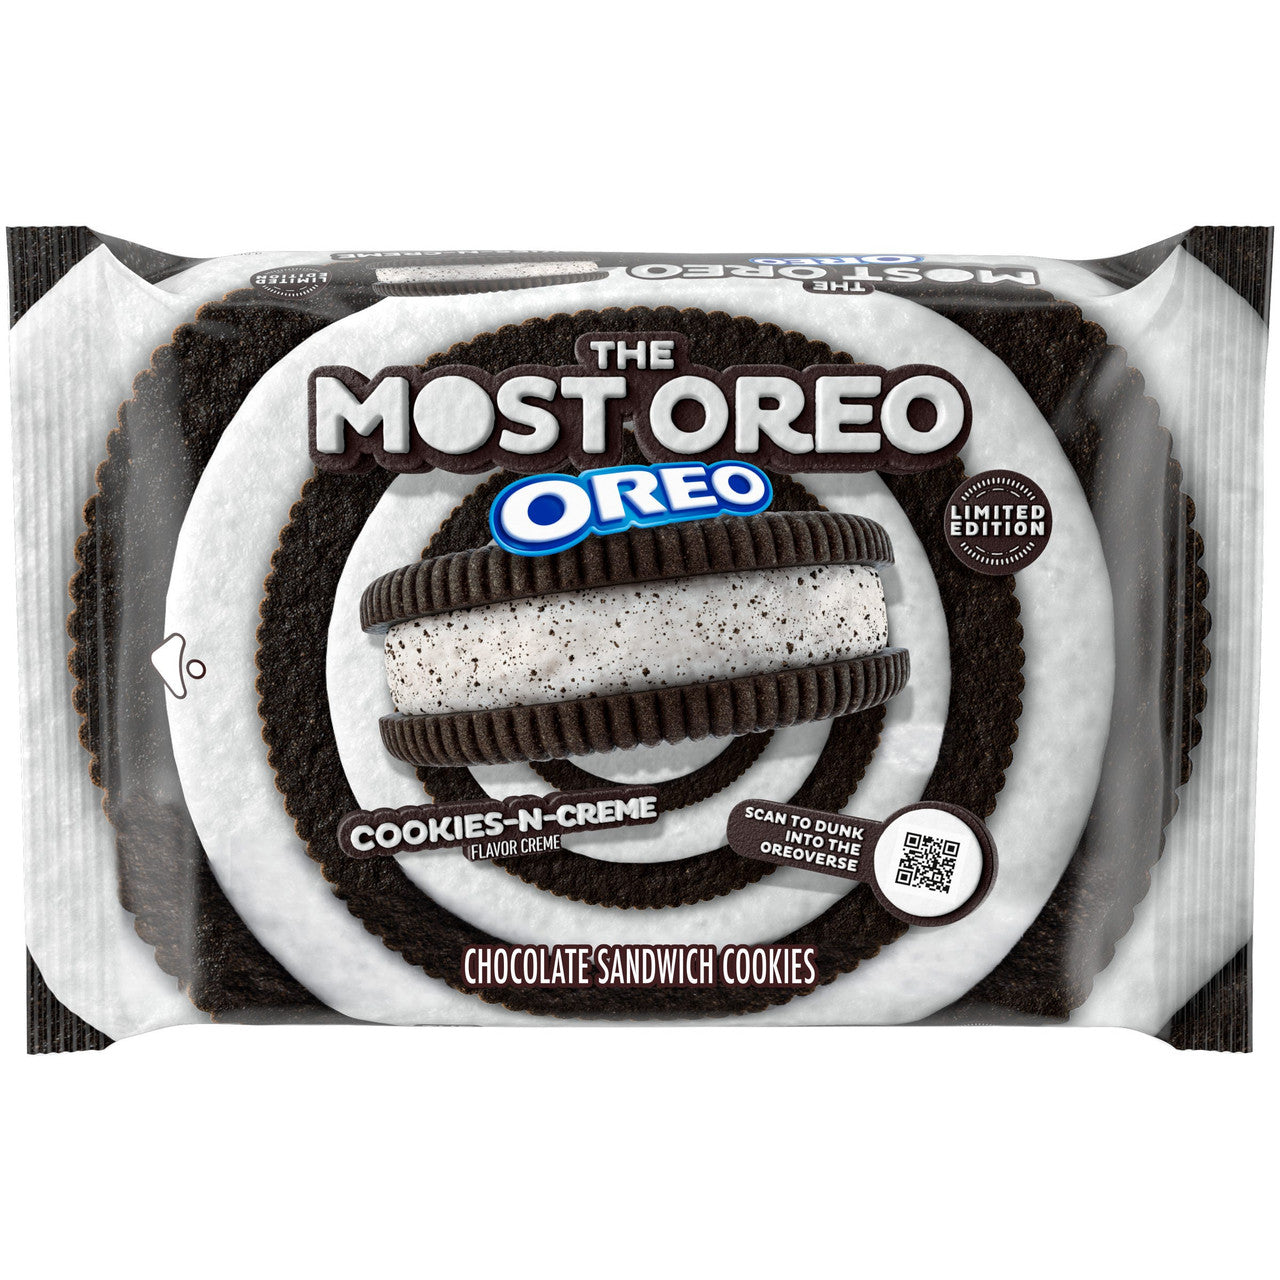 The Most Oreo Oreo Sandwich Cookies, 379g/13.3 oz., Package {Imported from Canada}